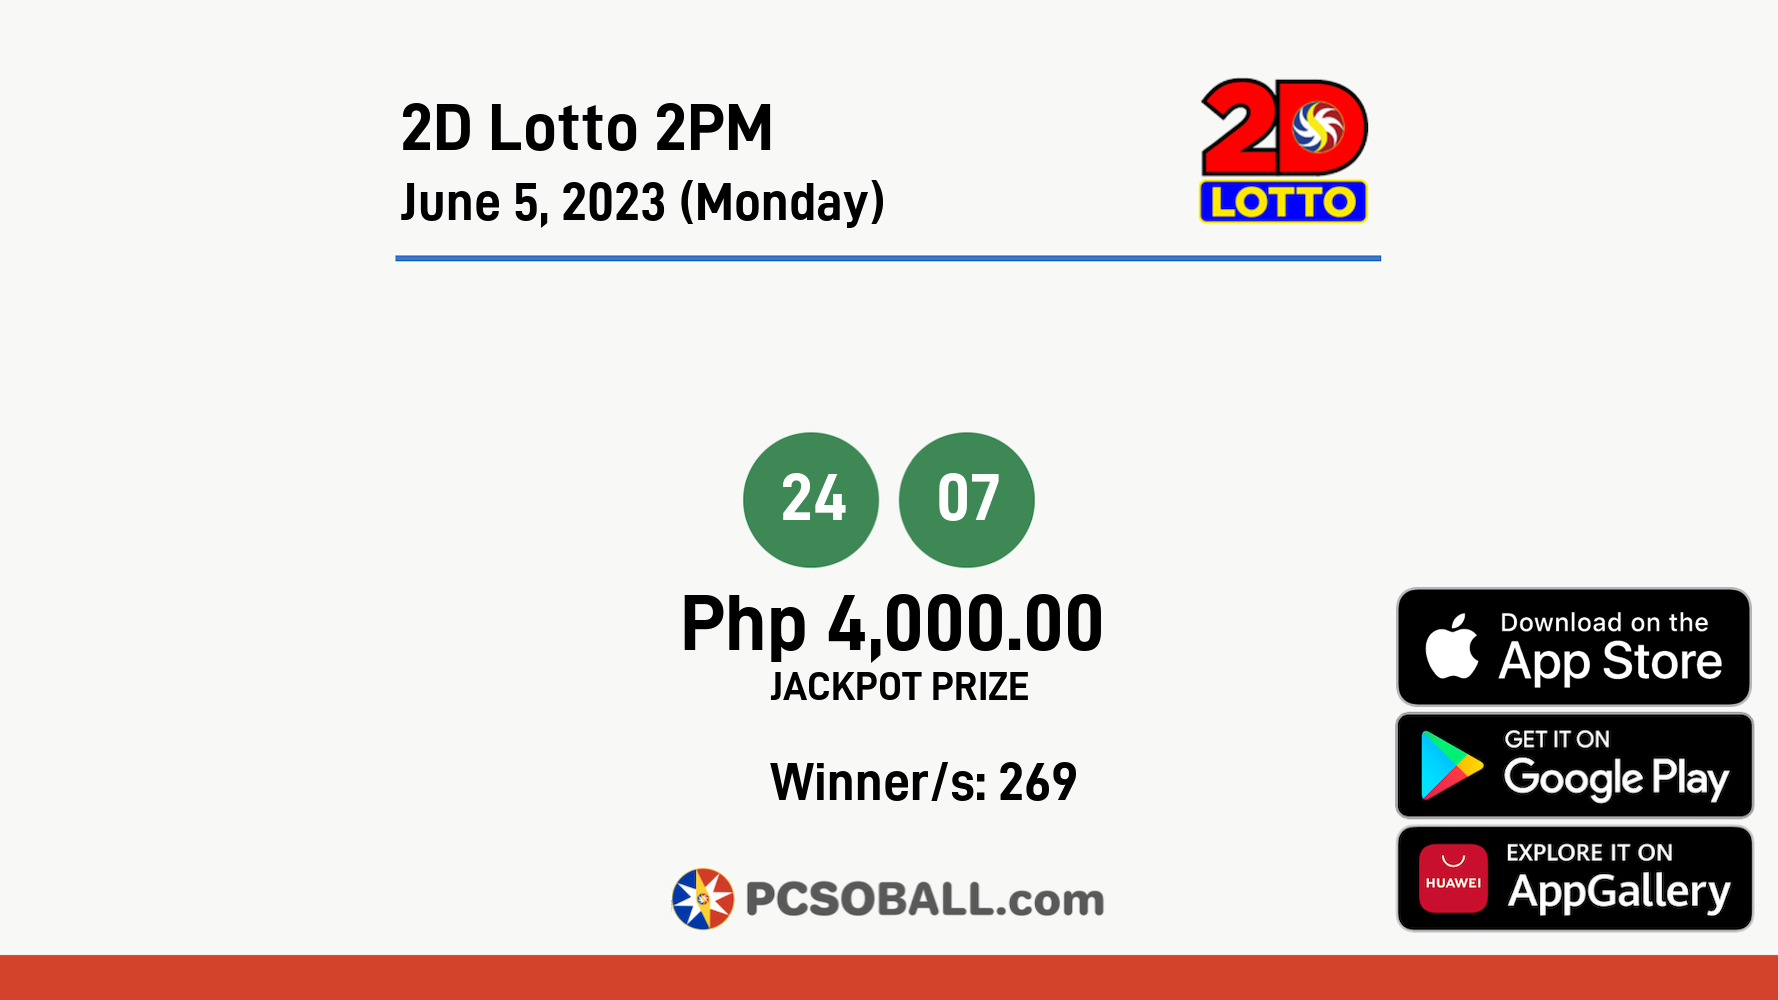 2D Lotto 2PM June 5, 2023 (Monday) Result